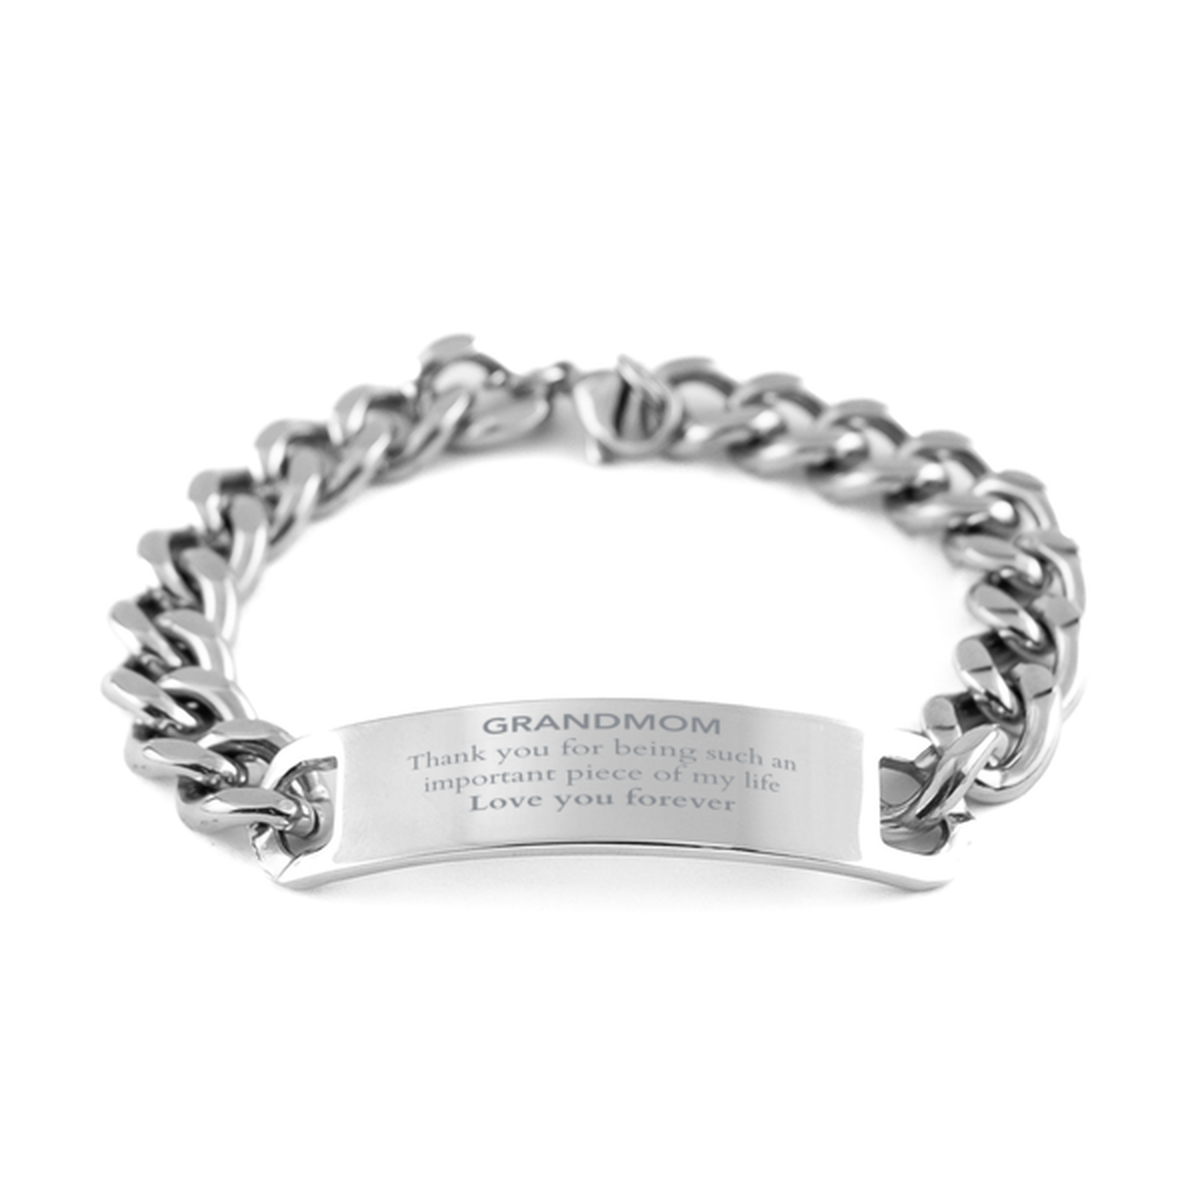 Appropriate Grandmom Cuban Chain Stainless Steel Bracelet Epic Birthday Gifts for Grandmom Thank you for being such an important piece of my life Grandmom Christmas Mothers Fathers Day